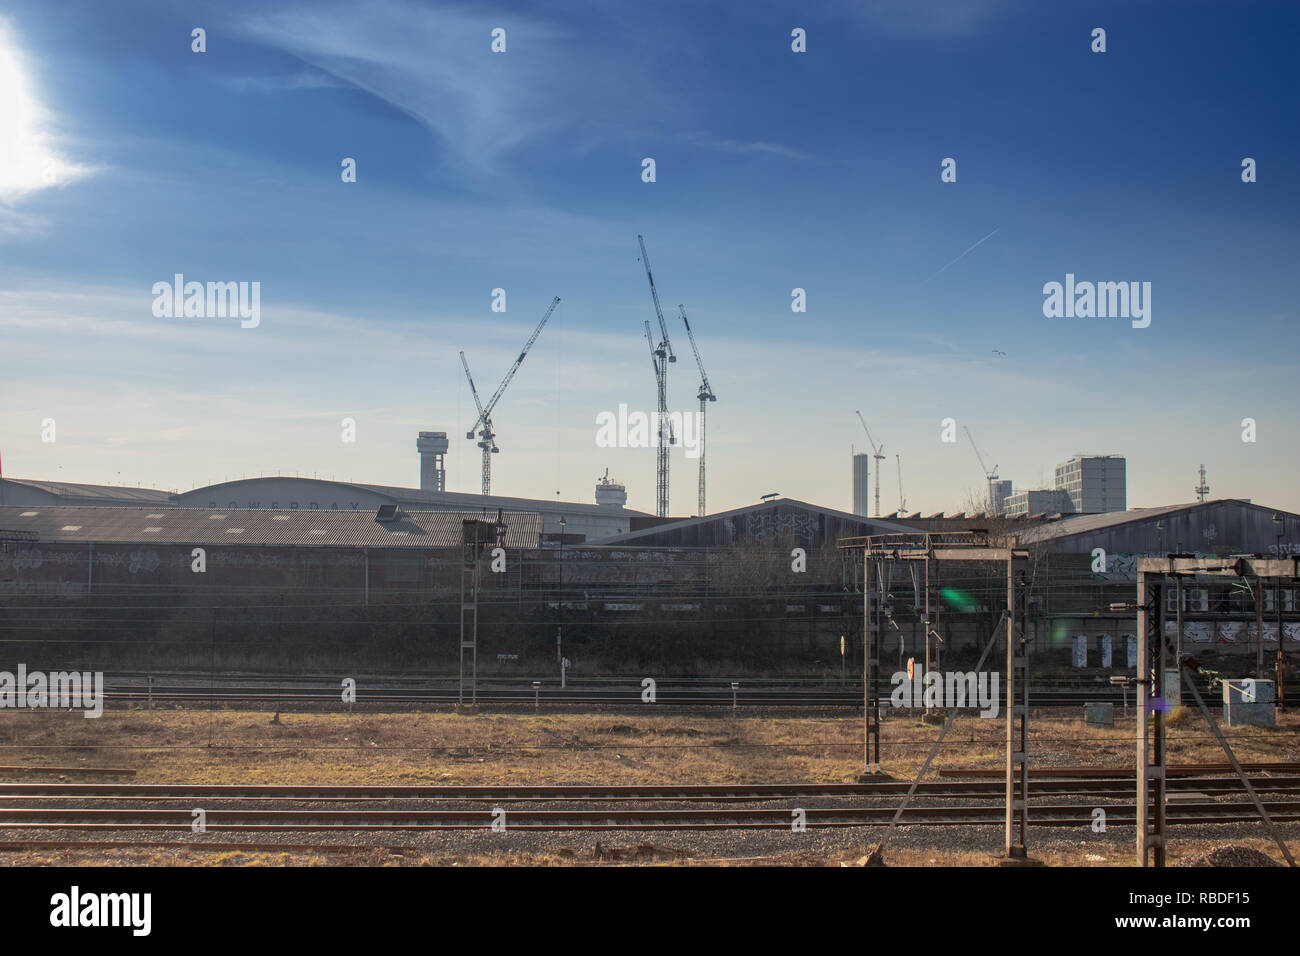 Cranes and Skyline at Willesden Junction/Rail Depot Stock Photo